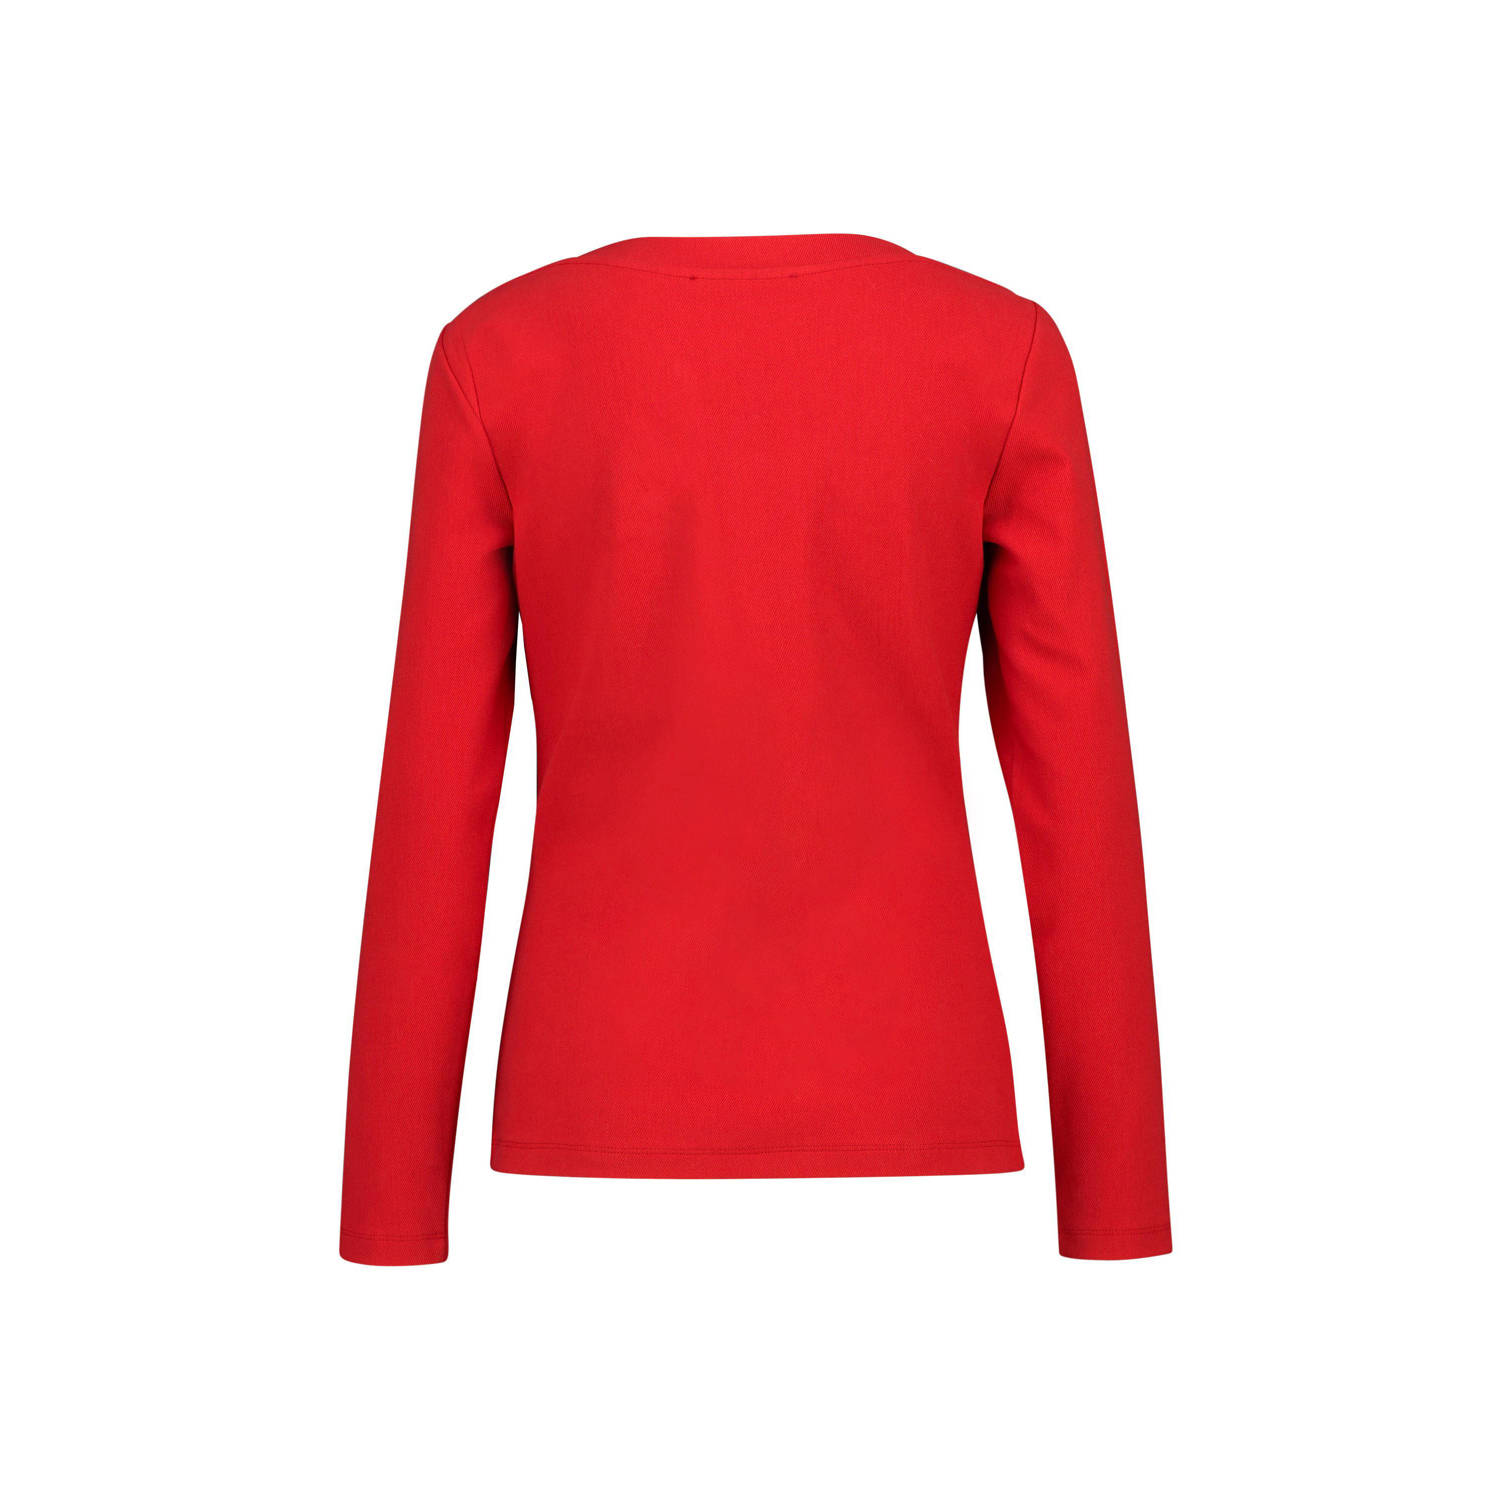 Expresso jersey top rood